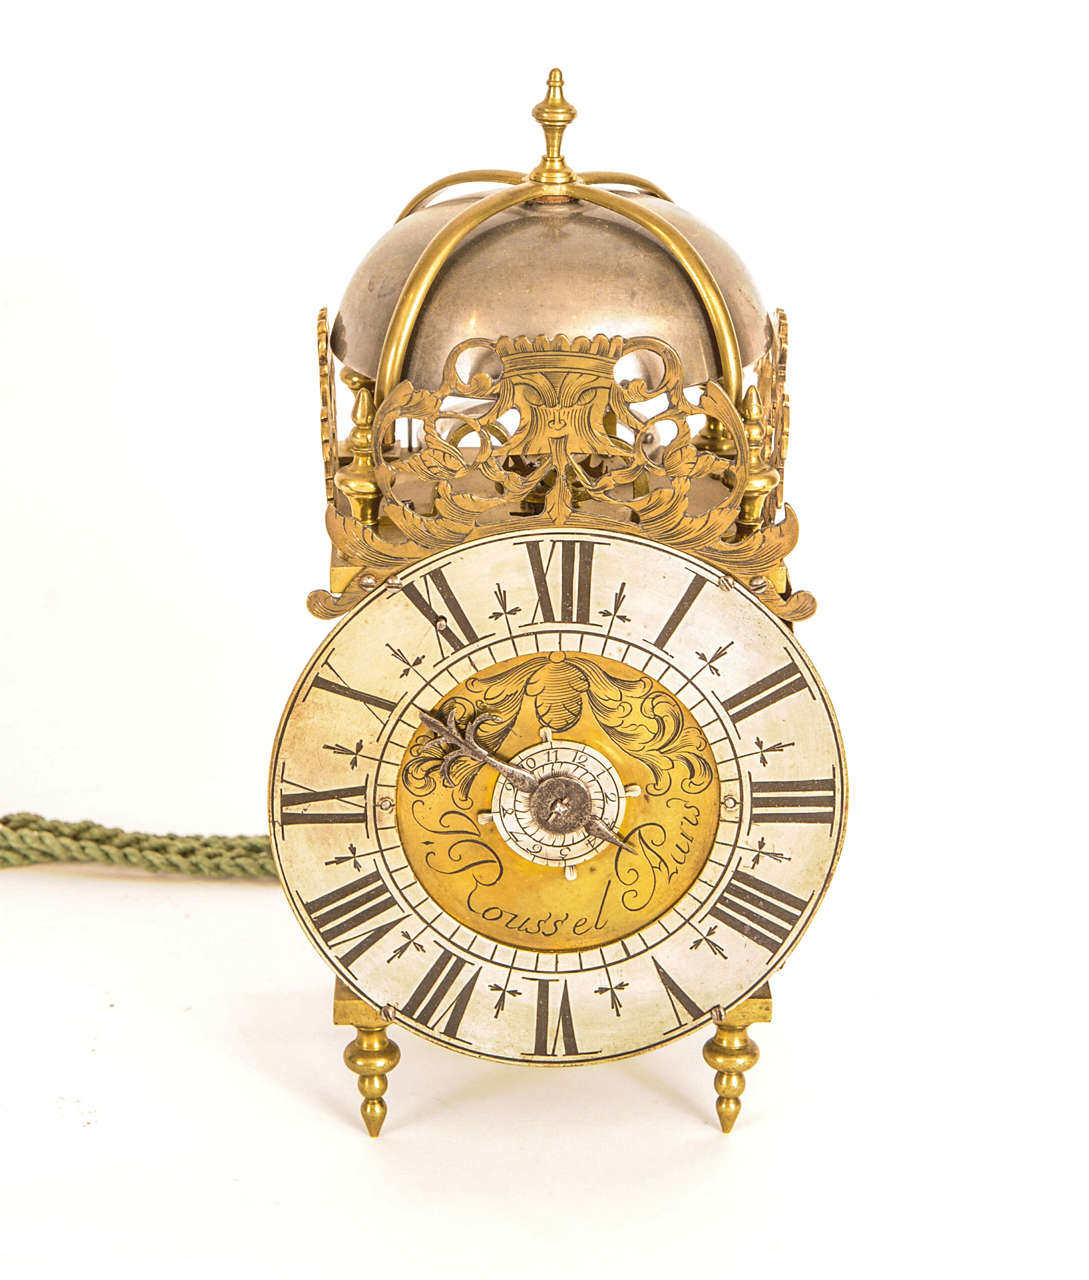 A Small French Brass alarm Lantern Clock, J. Roussel a Paris, circa 1730 In Good Condition For Sale In Amsterdam, Noord Holland